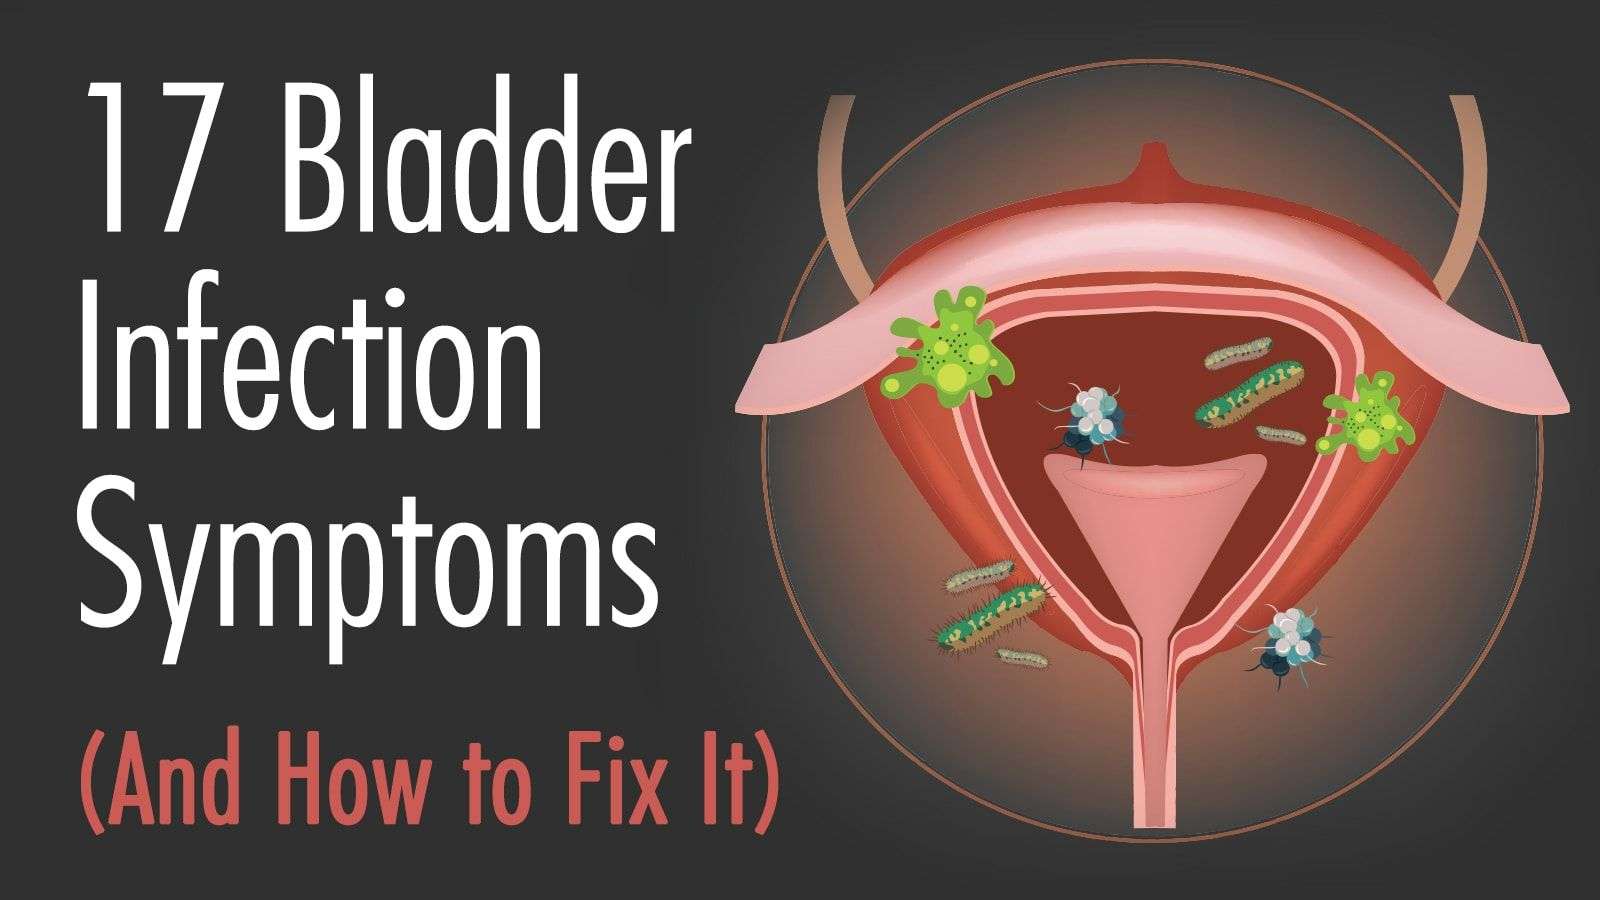 17 Bladder Infection Symptoms (And How to Fix It ...